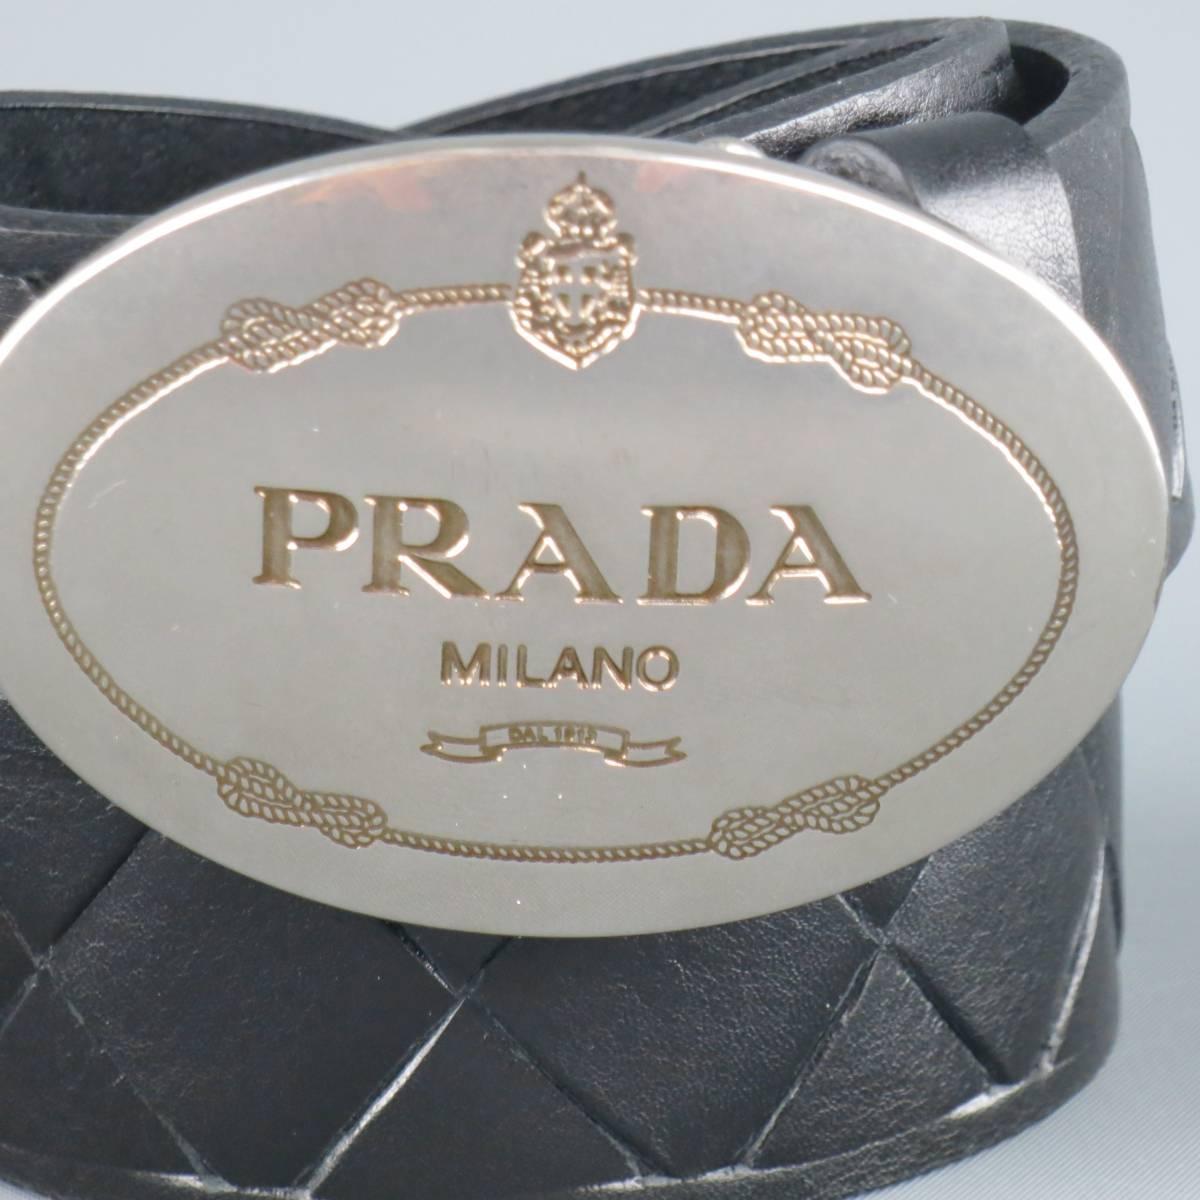 PRADA belt features a black smooth woven leather strap and silver tone engraved logo oval shaped buckle. Made in Italy.
 
Excellent Pre-Owned Condition.
Marked: 8
 
Length: 48 in.
Width: 1.5 in.
Fits: 40-44 in.
Buckle: 3 x 2 in.
